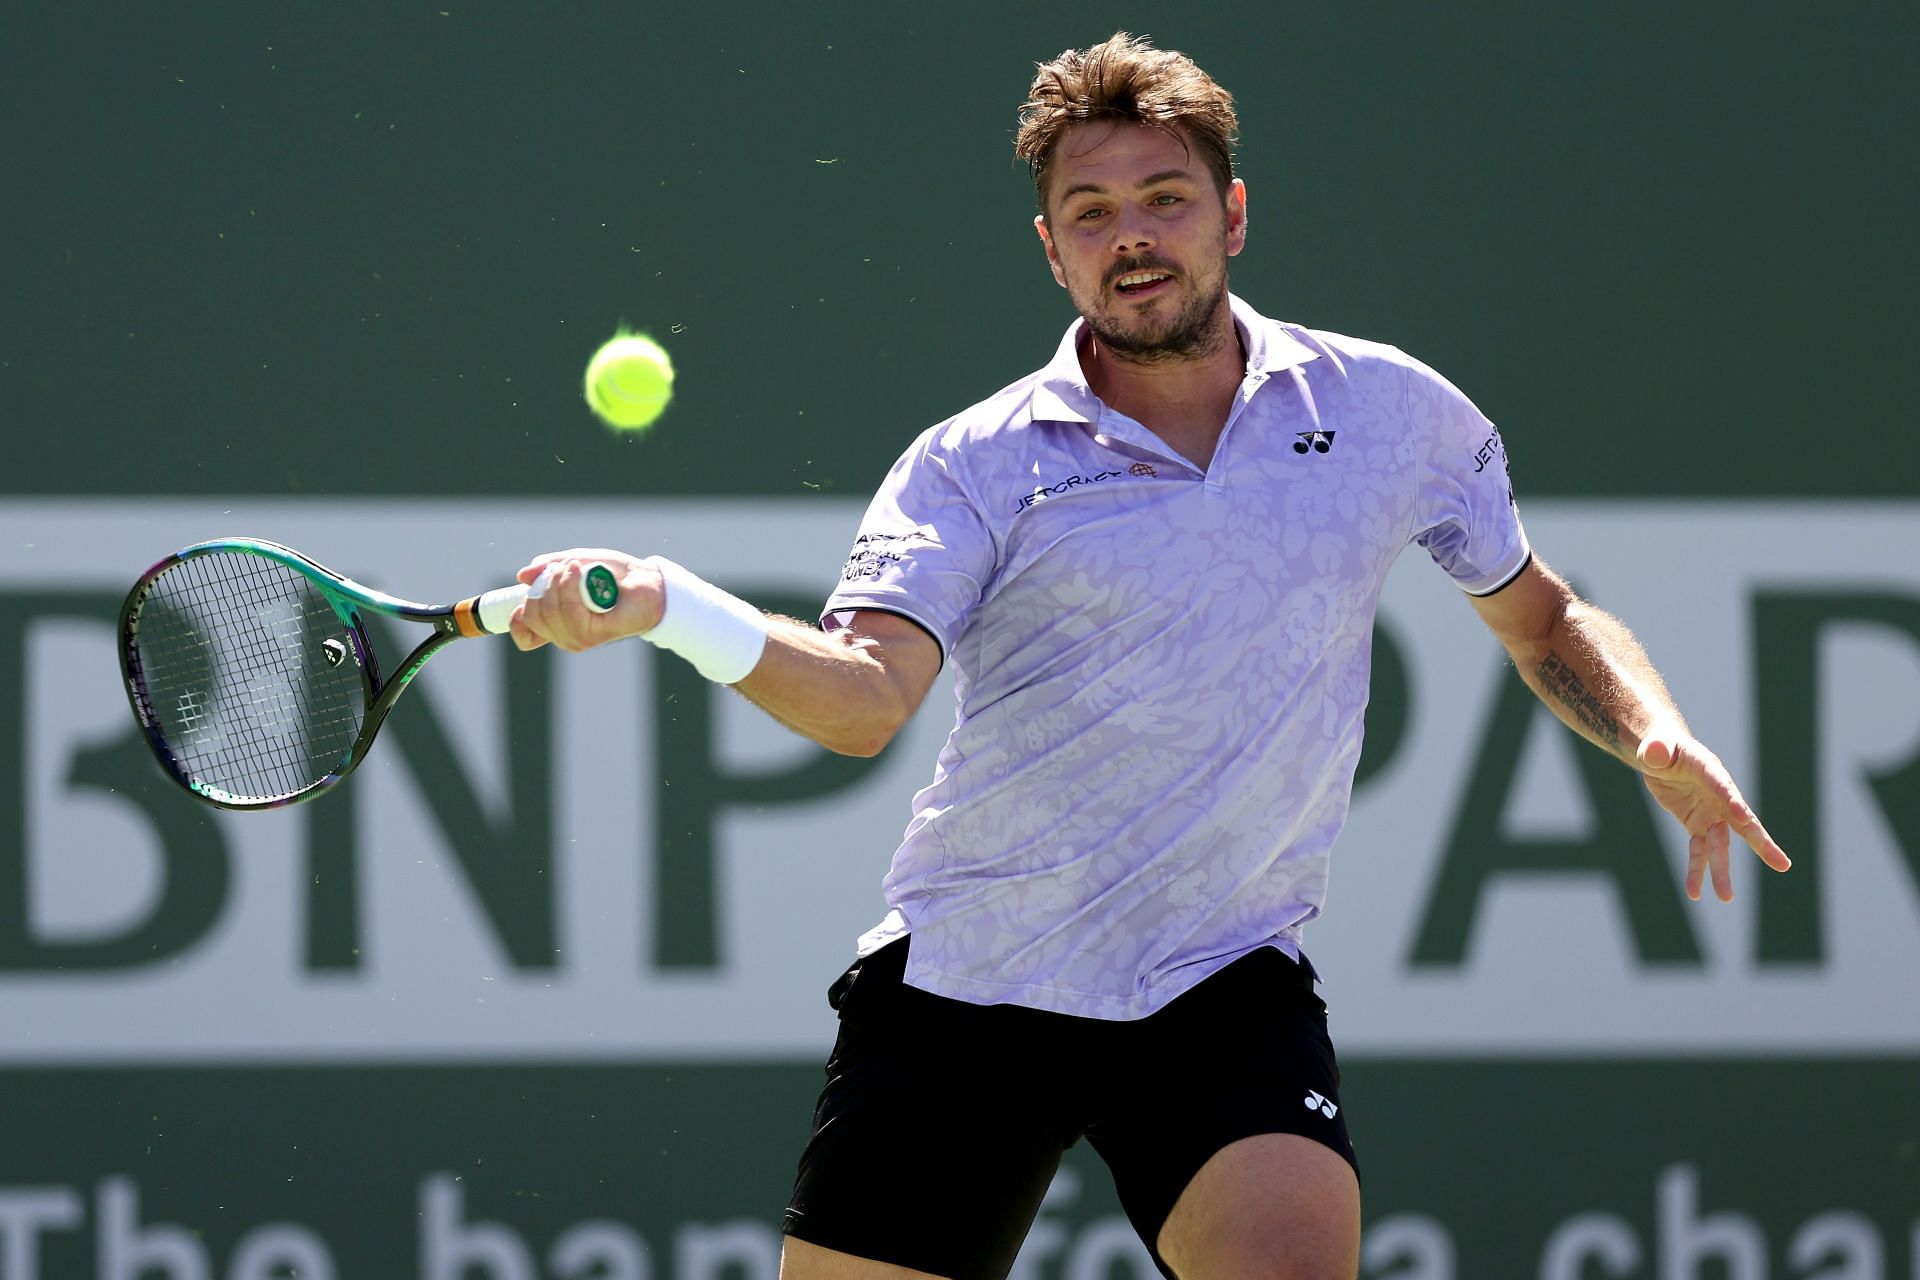 Stan Wawrinka has had a rousing start to the year.